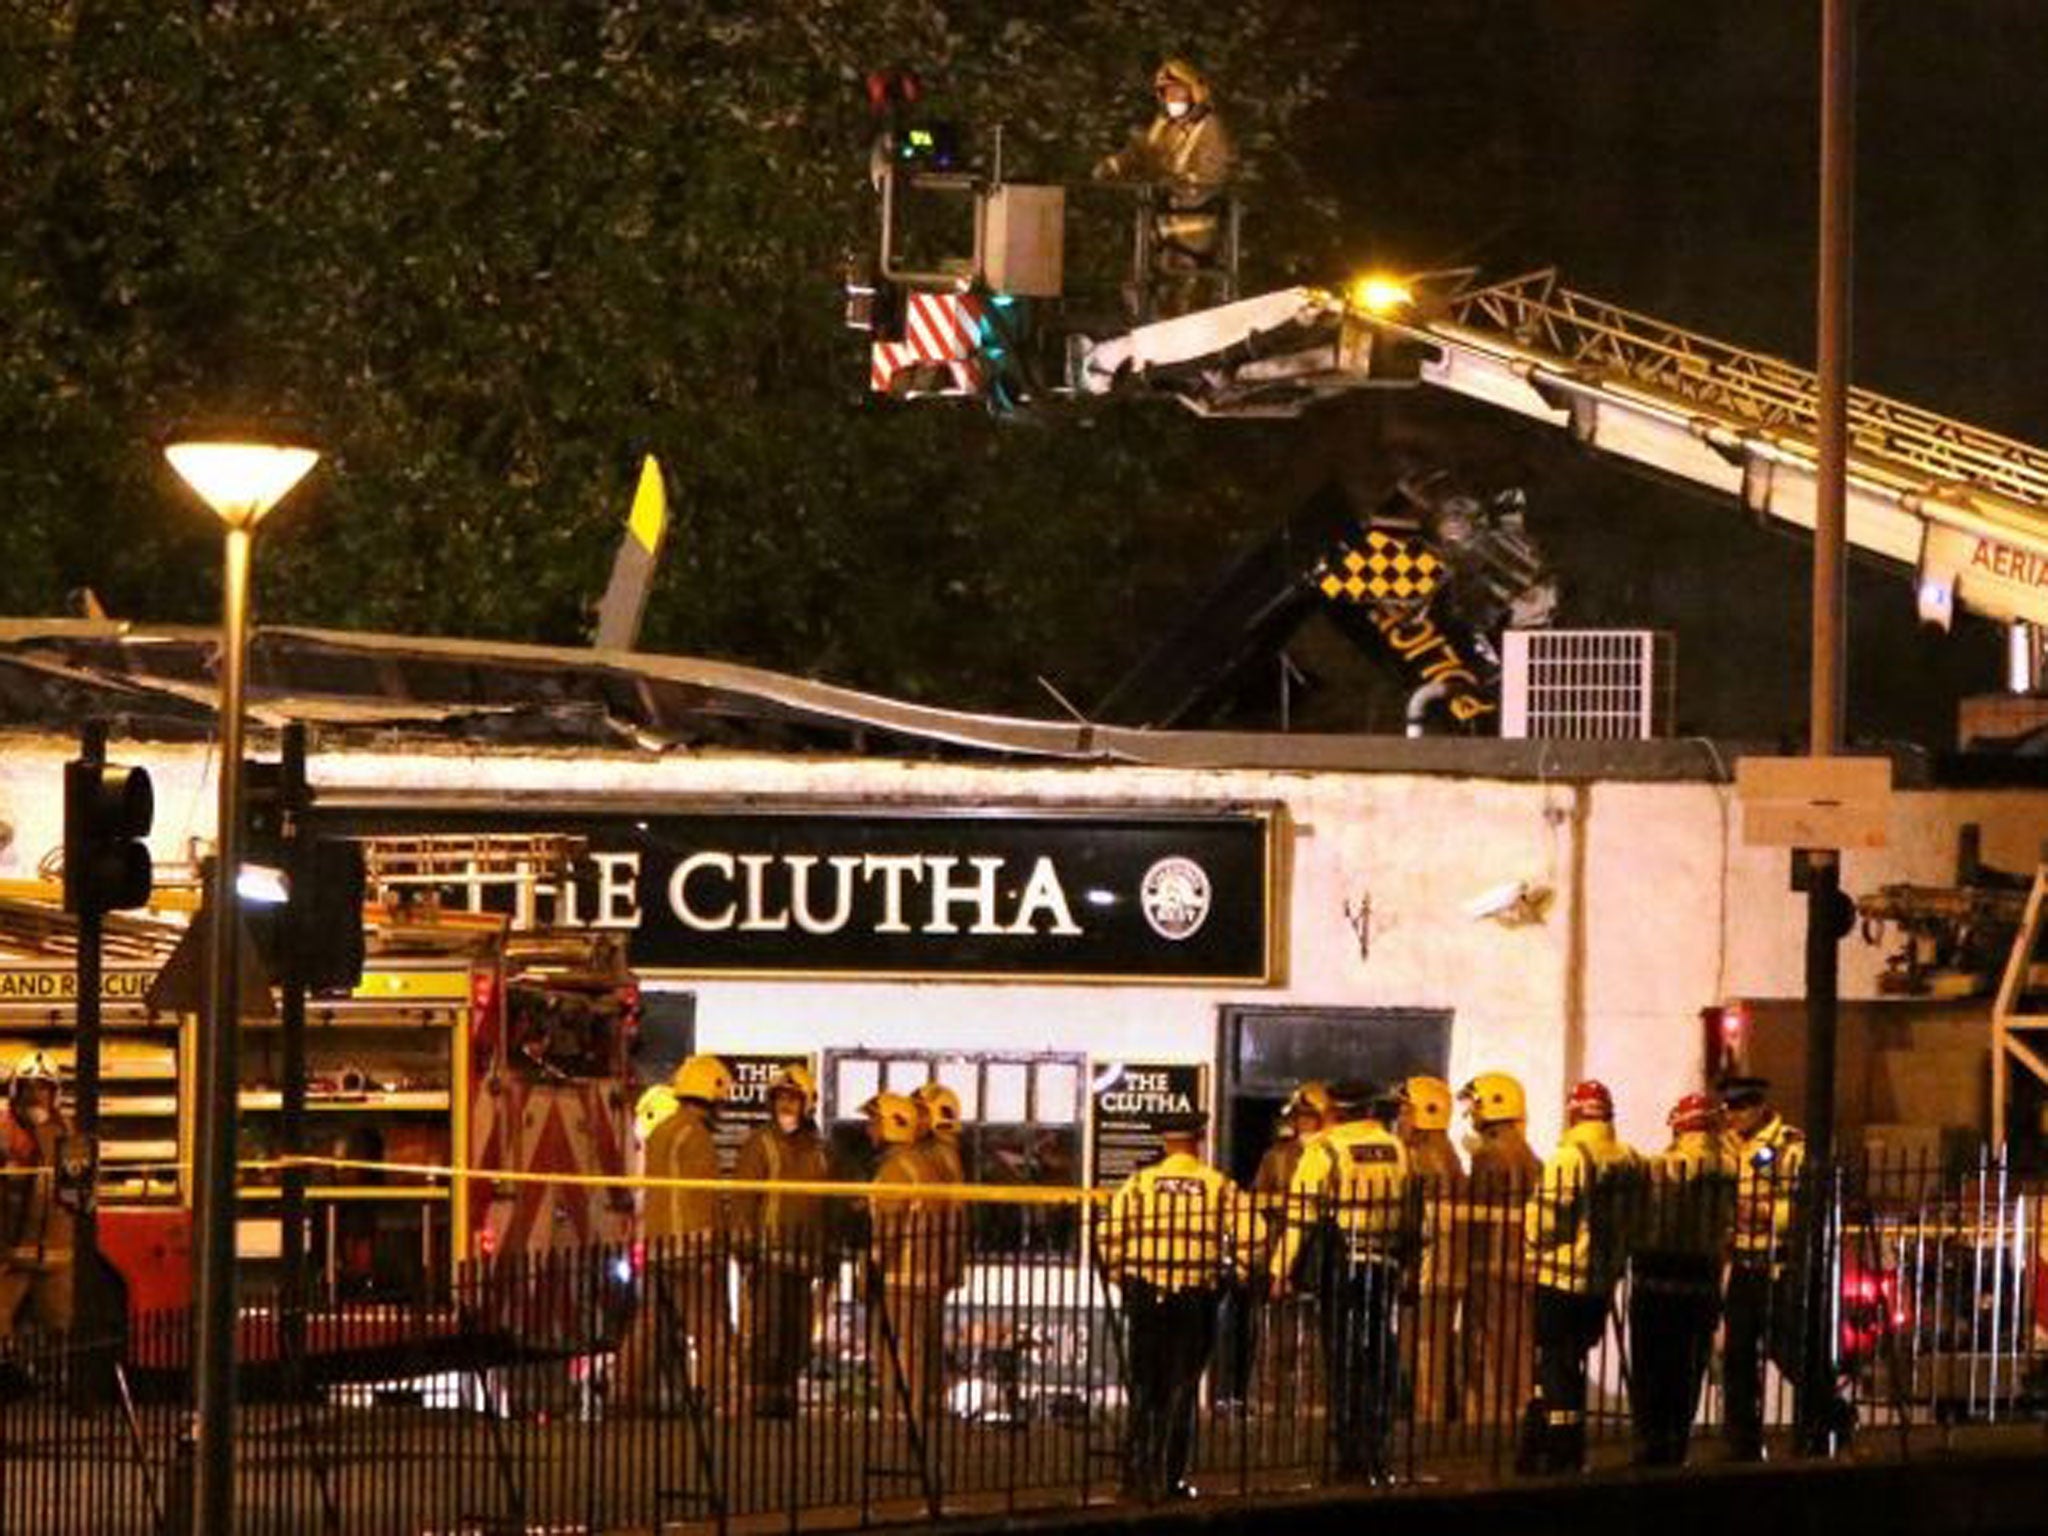 File photo, dated 30 November, at the scene of the helicopter crash at the Clutha Bar in Glasgow